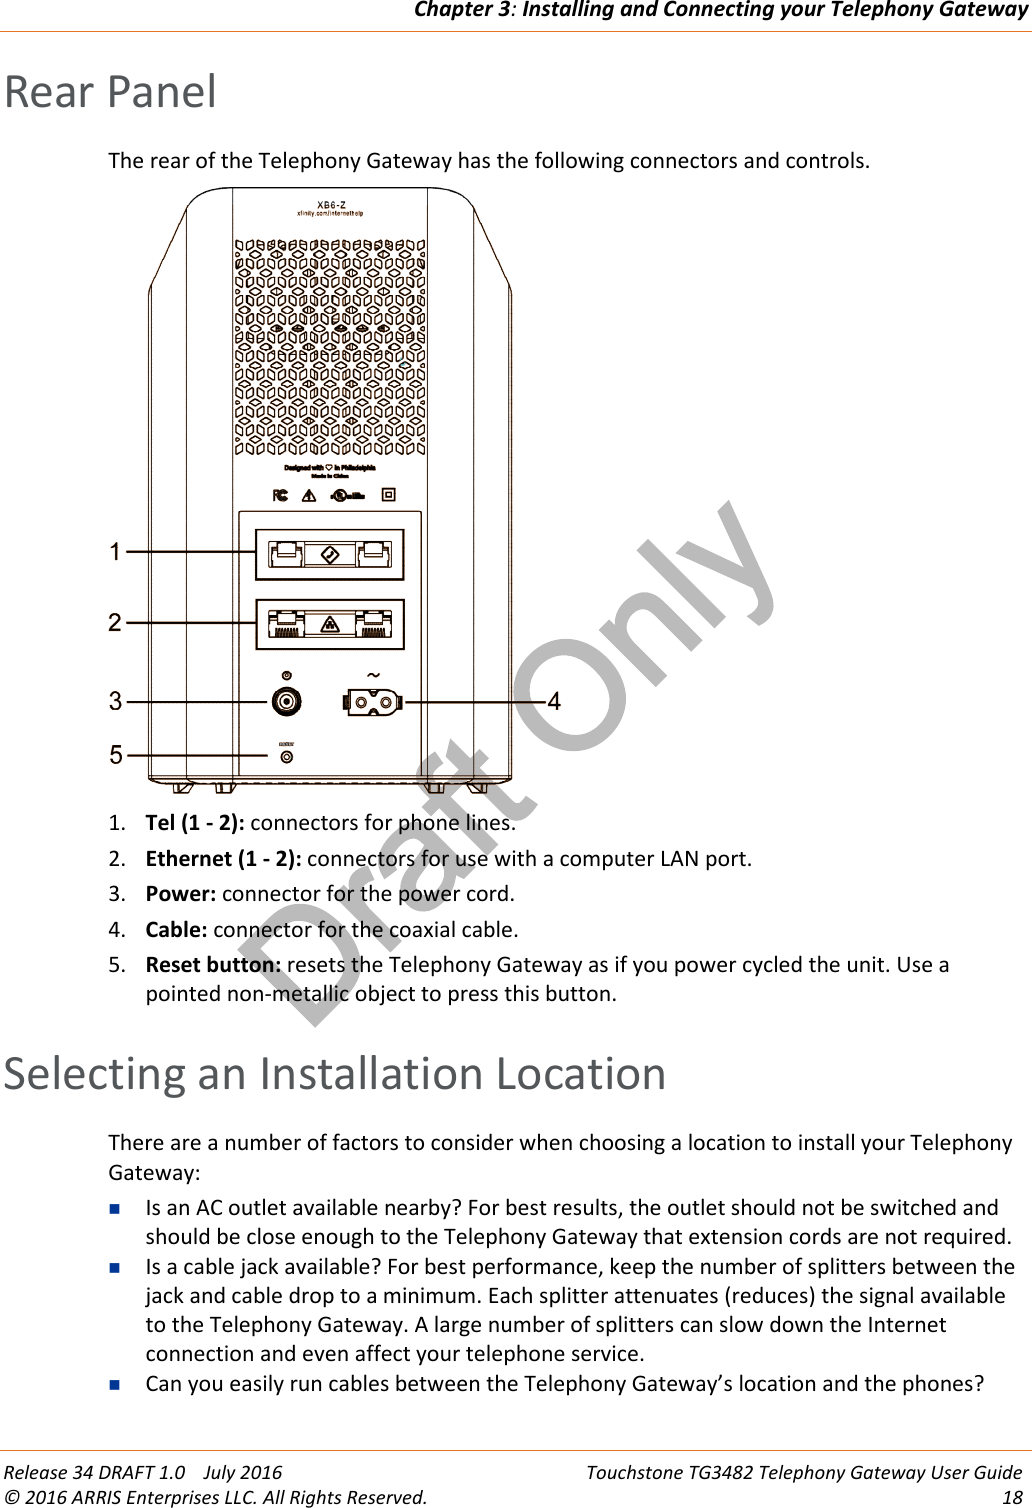 Draft OnlyChapter 3:Installing and Connecting your Telephony GatewayRelease 34 DRAFT 1.0 July 2016 Touchstone TG3482 Telephony Gateway User Guide© 2016 ARRIS Enterprises LLC. All Rights Reserved. 18Rear PanelThe rear of the Telephony Gateway has the following connectors and controls.1. Tel (1 - 2): connectors for phone lines.2. Ethernet (1 - 2): connectors for use with a computer LAN port.3. Power: connector for the power cord.4. Cable: connector for the coaxial cable.5. Reset button: resets the Telephony Gateway as if you power cycled the unit. Use apointed non-metallic object to press this button.Selecting an Installation LocationThere are a number of factors to consider when choosing a location to install your TelephonyGateway:Is an AC outlet available nearby? For best results, the outlet should not be switched andshould be close enough to the Telephony Gateway that extension cords are not required.Is a cable jack available? For best performance, keep the number of splitters between thejack and cable drop to a minimum. Each splitter attenuates (reduces) the signal availableto the Telephony Gateway. A large number of splitters can slow down the Internetconnection and even affect your telephone service.Can you easily run cables between the Telephony Gateway’s location and the phones?